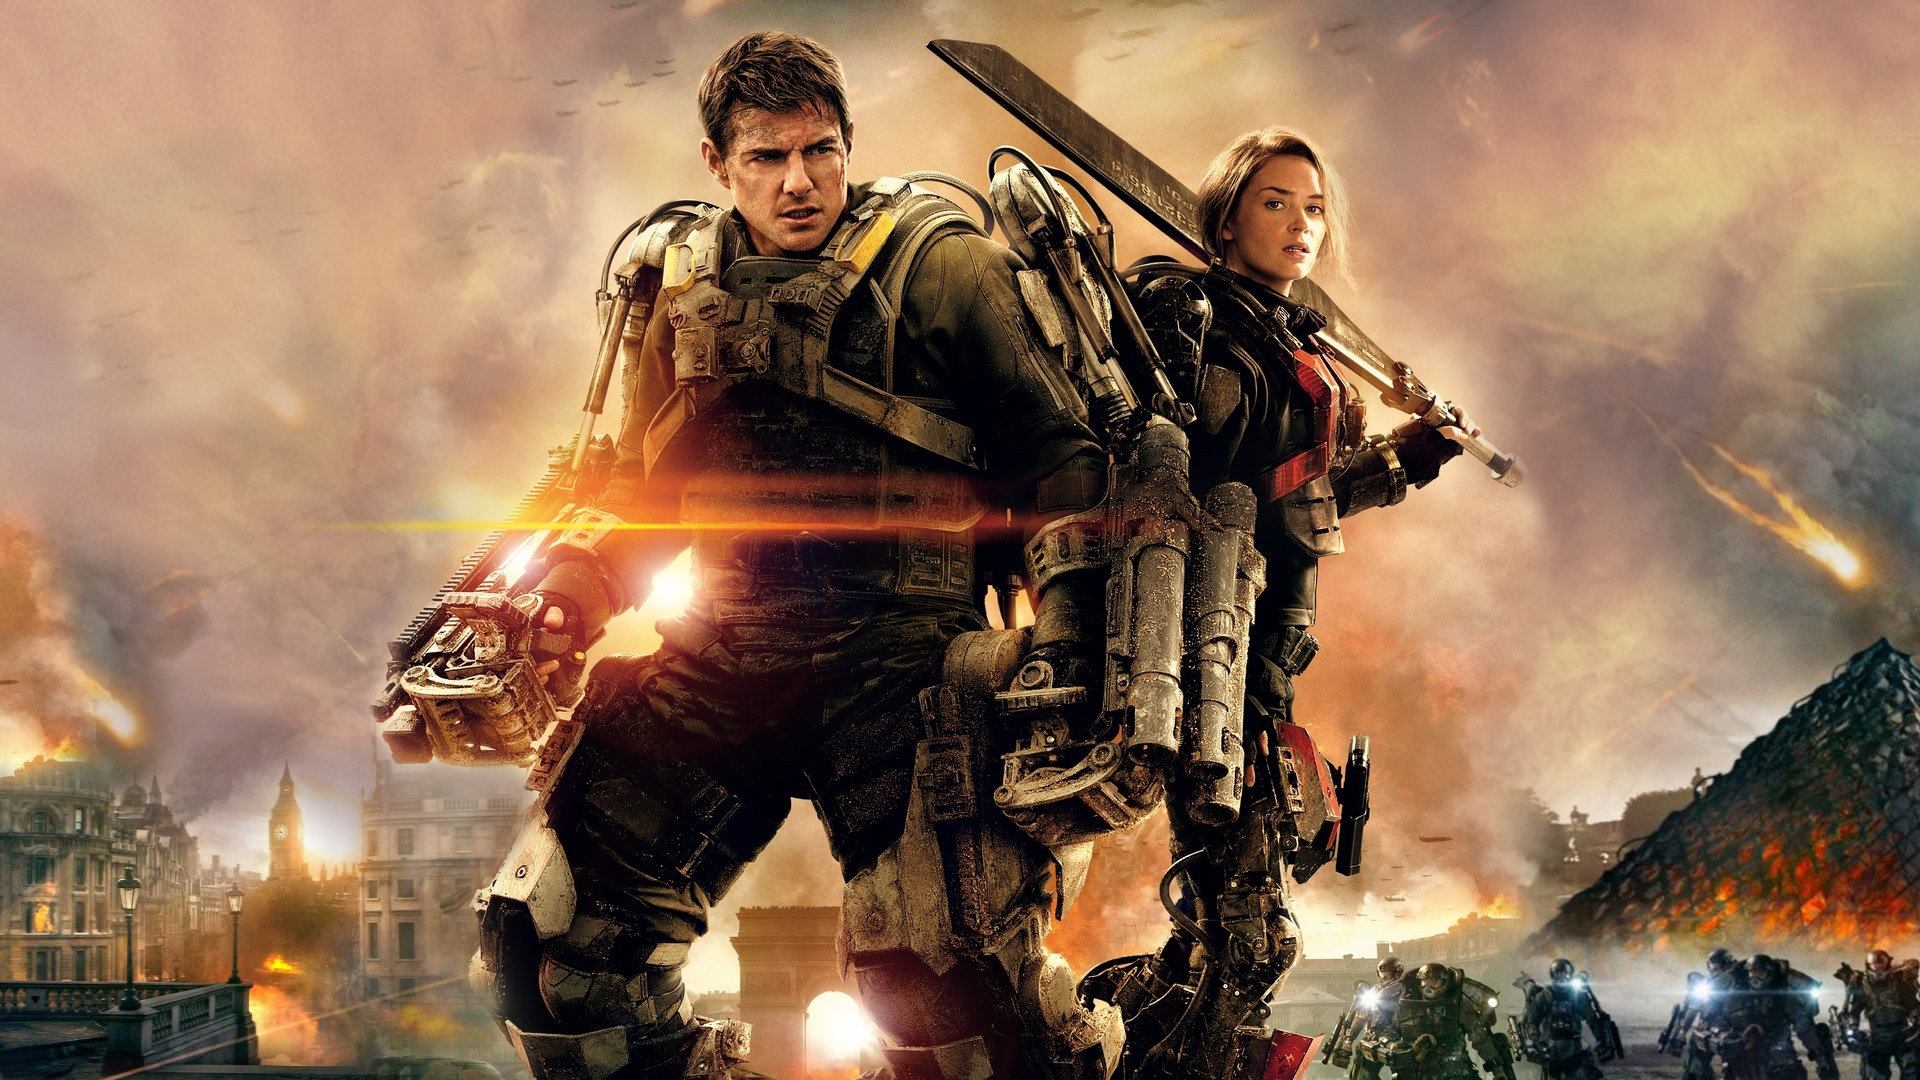 Best Edge Of Tomorrow wallpaper ID:148158 for High Resolution full hd 1080p computer